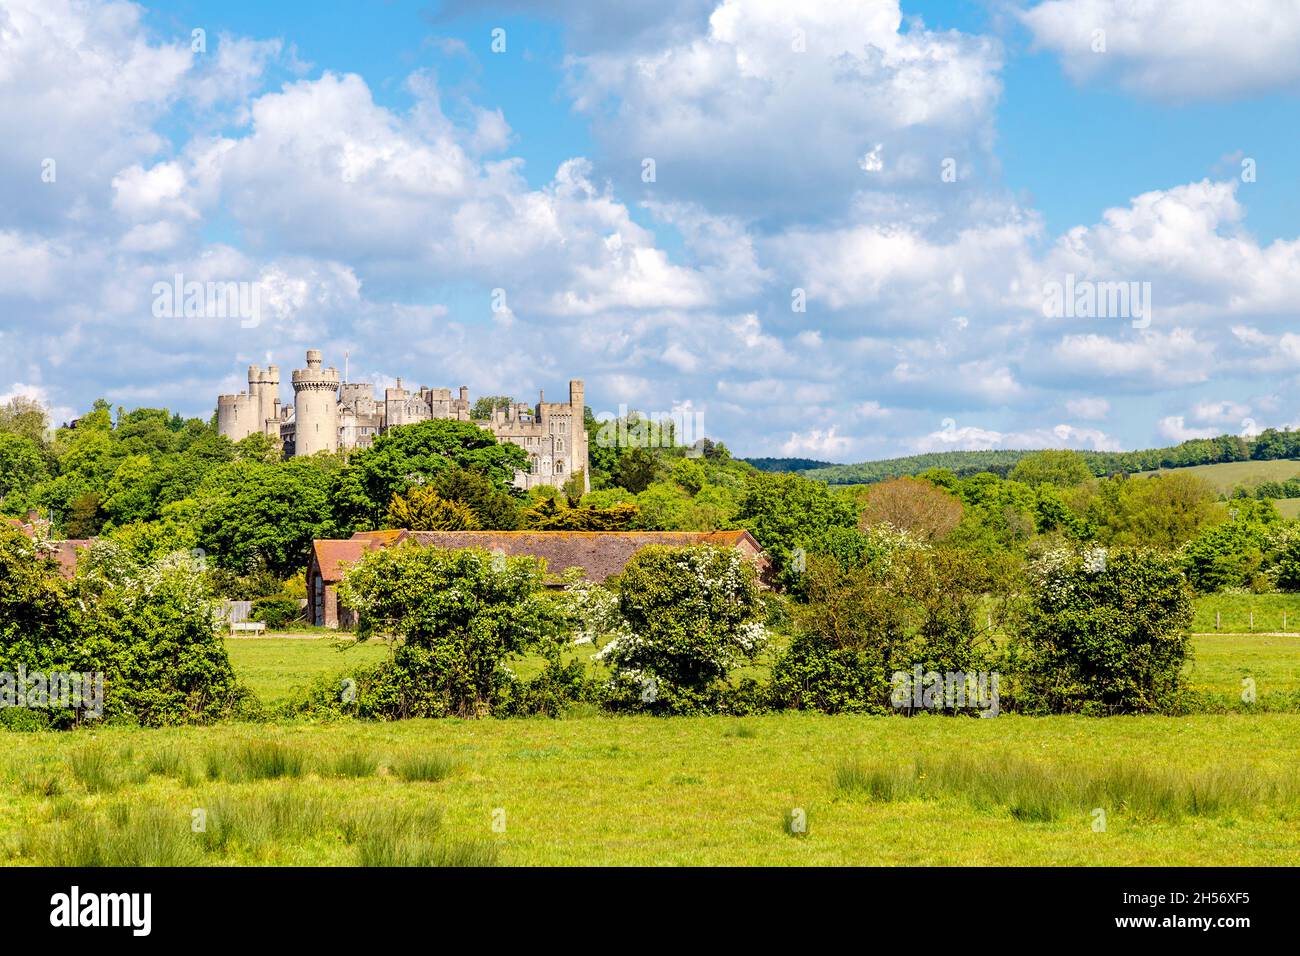 View of Arundel Castle and surrounding countryside, Arundel, West Sussex, UK Stock Photo